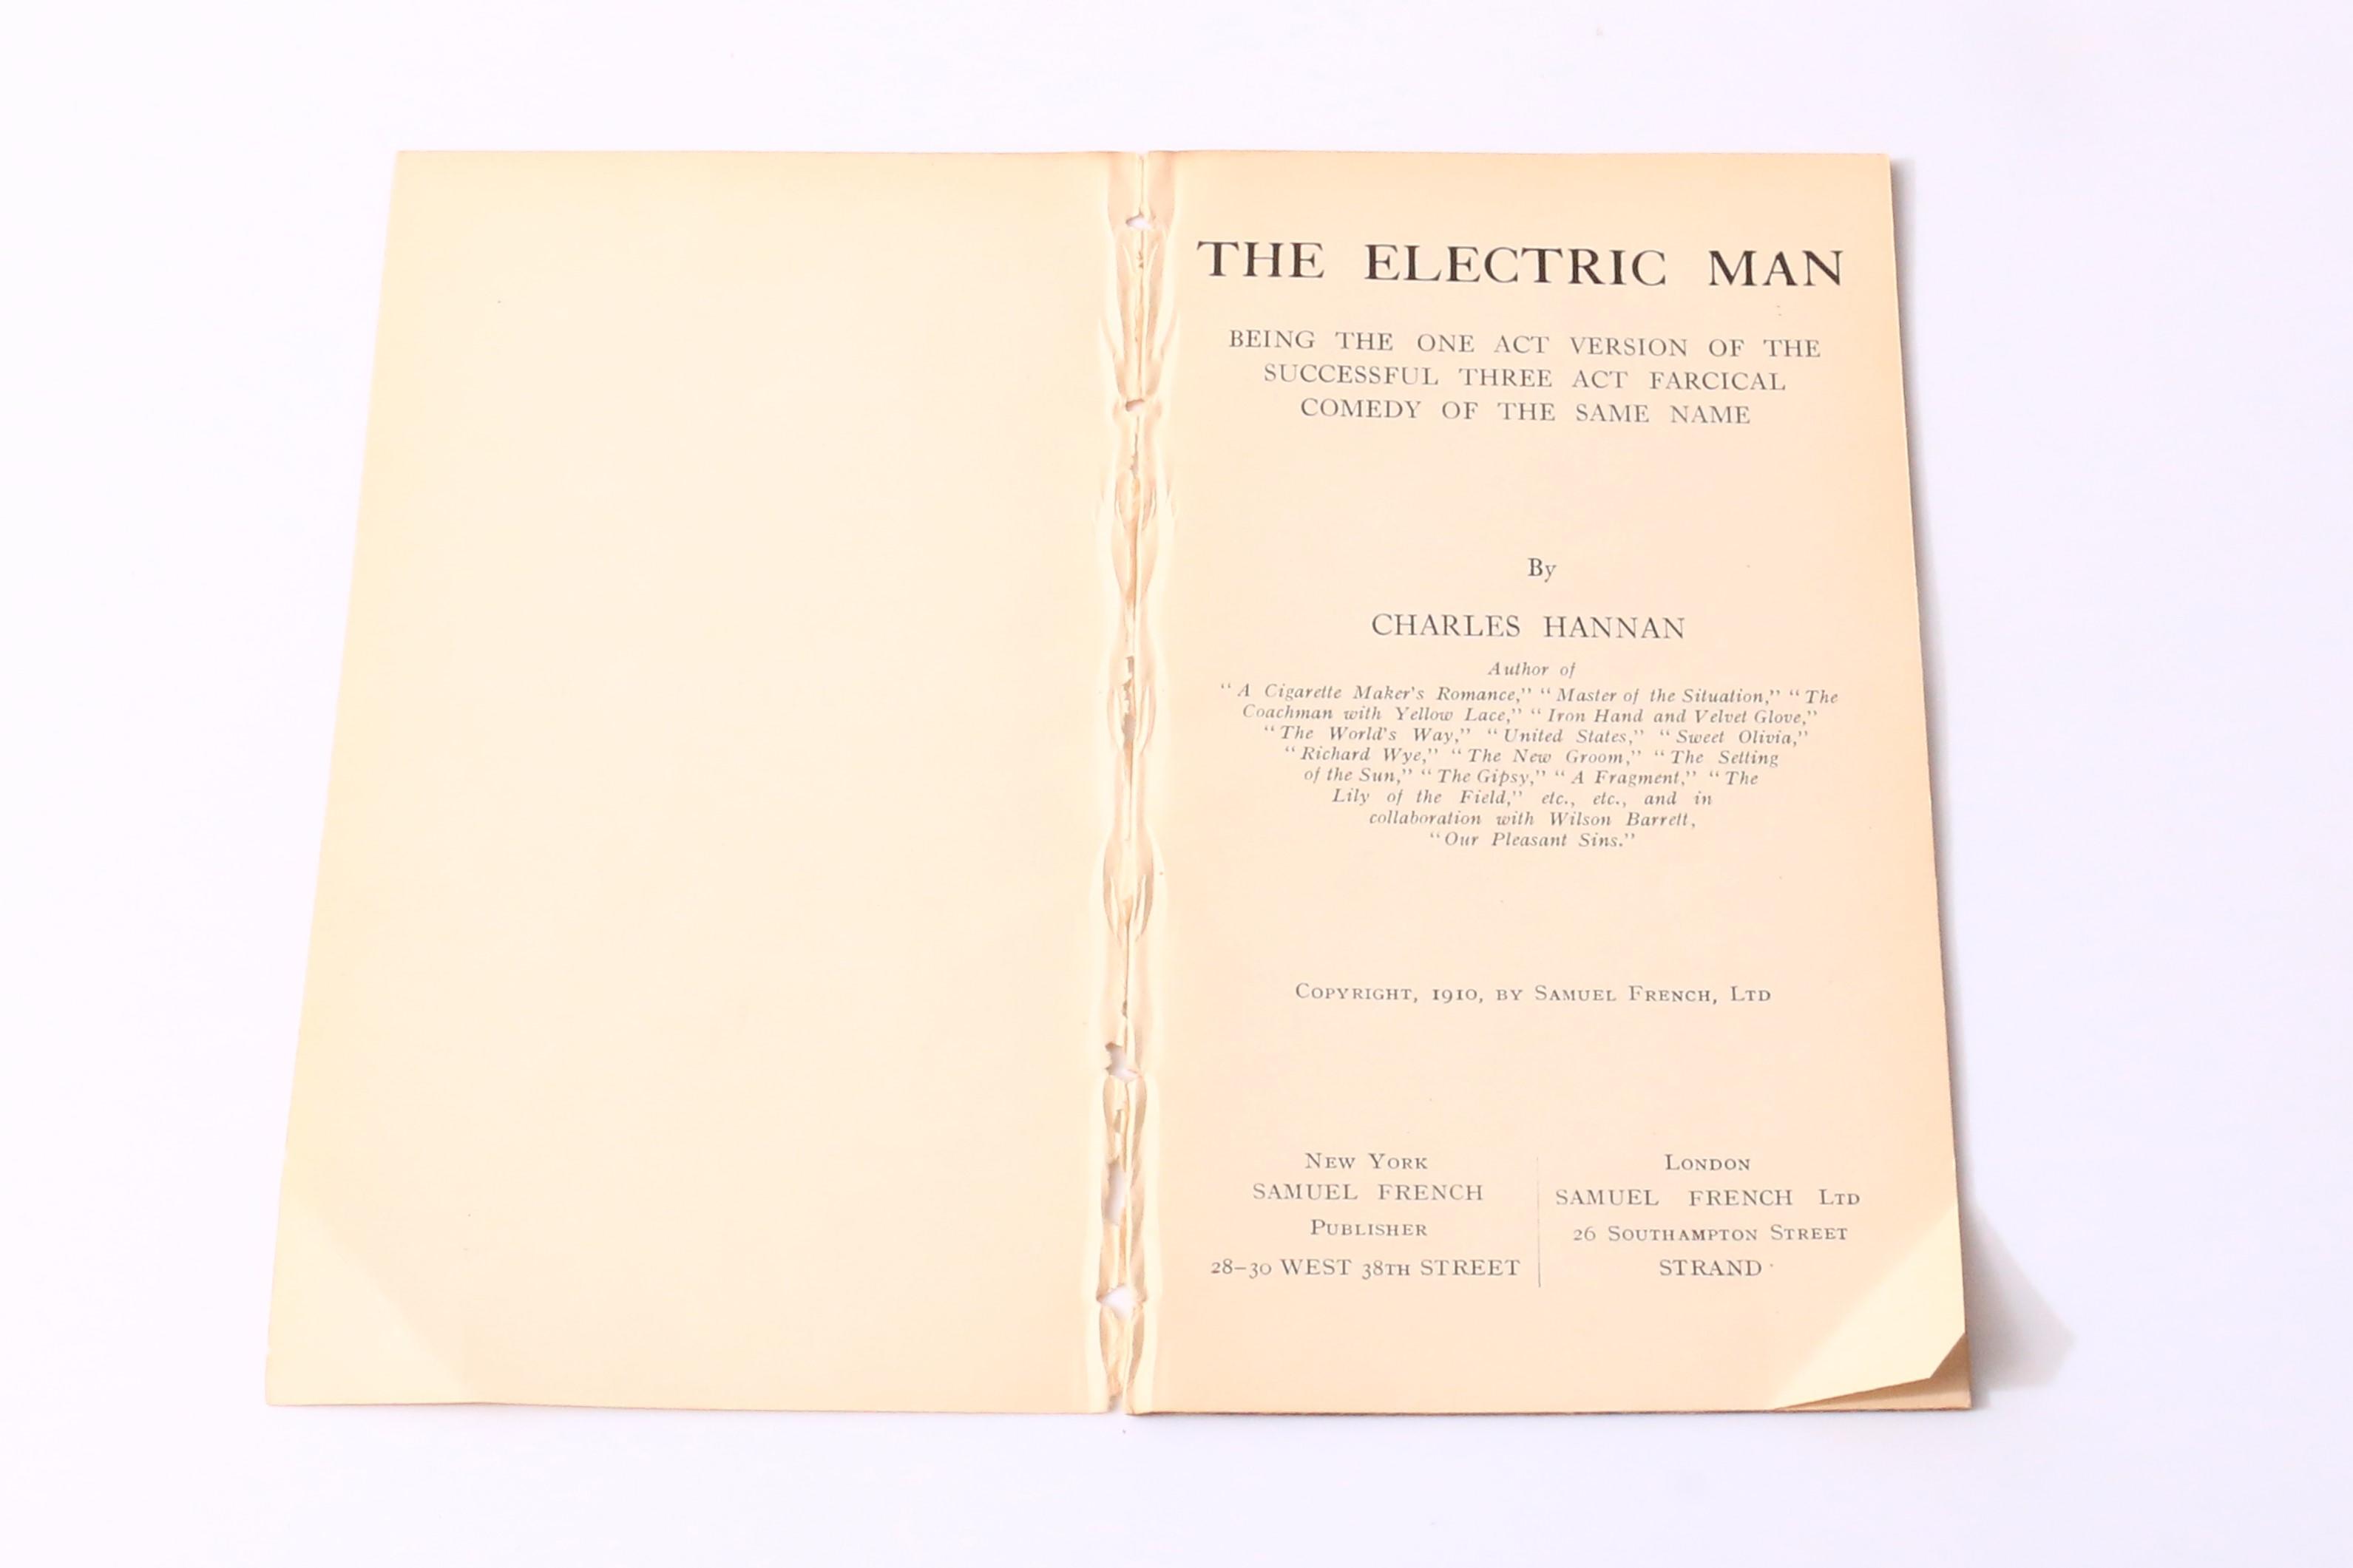 Charles Hannan - In The Electric Man: Being the One Act Version of the Three-Act Comedy - Samuel French, 1910, First Edition.